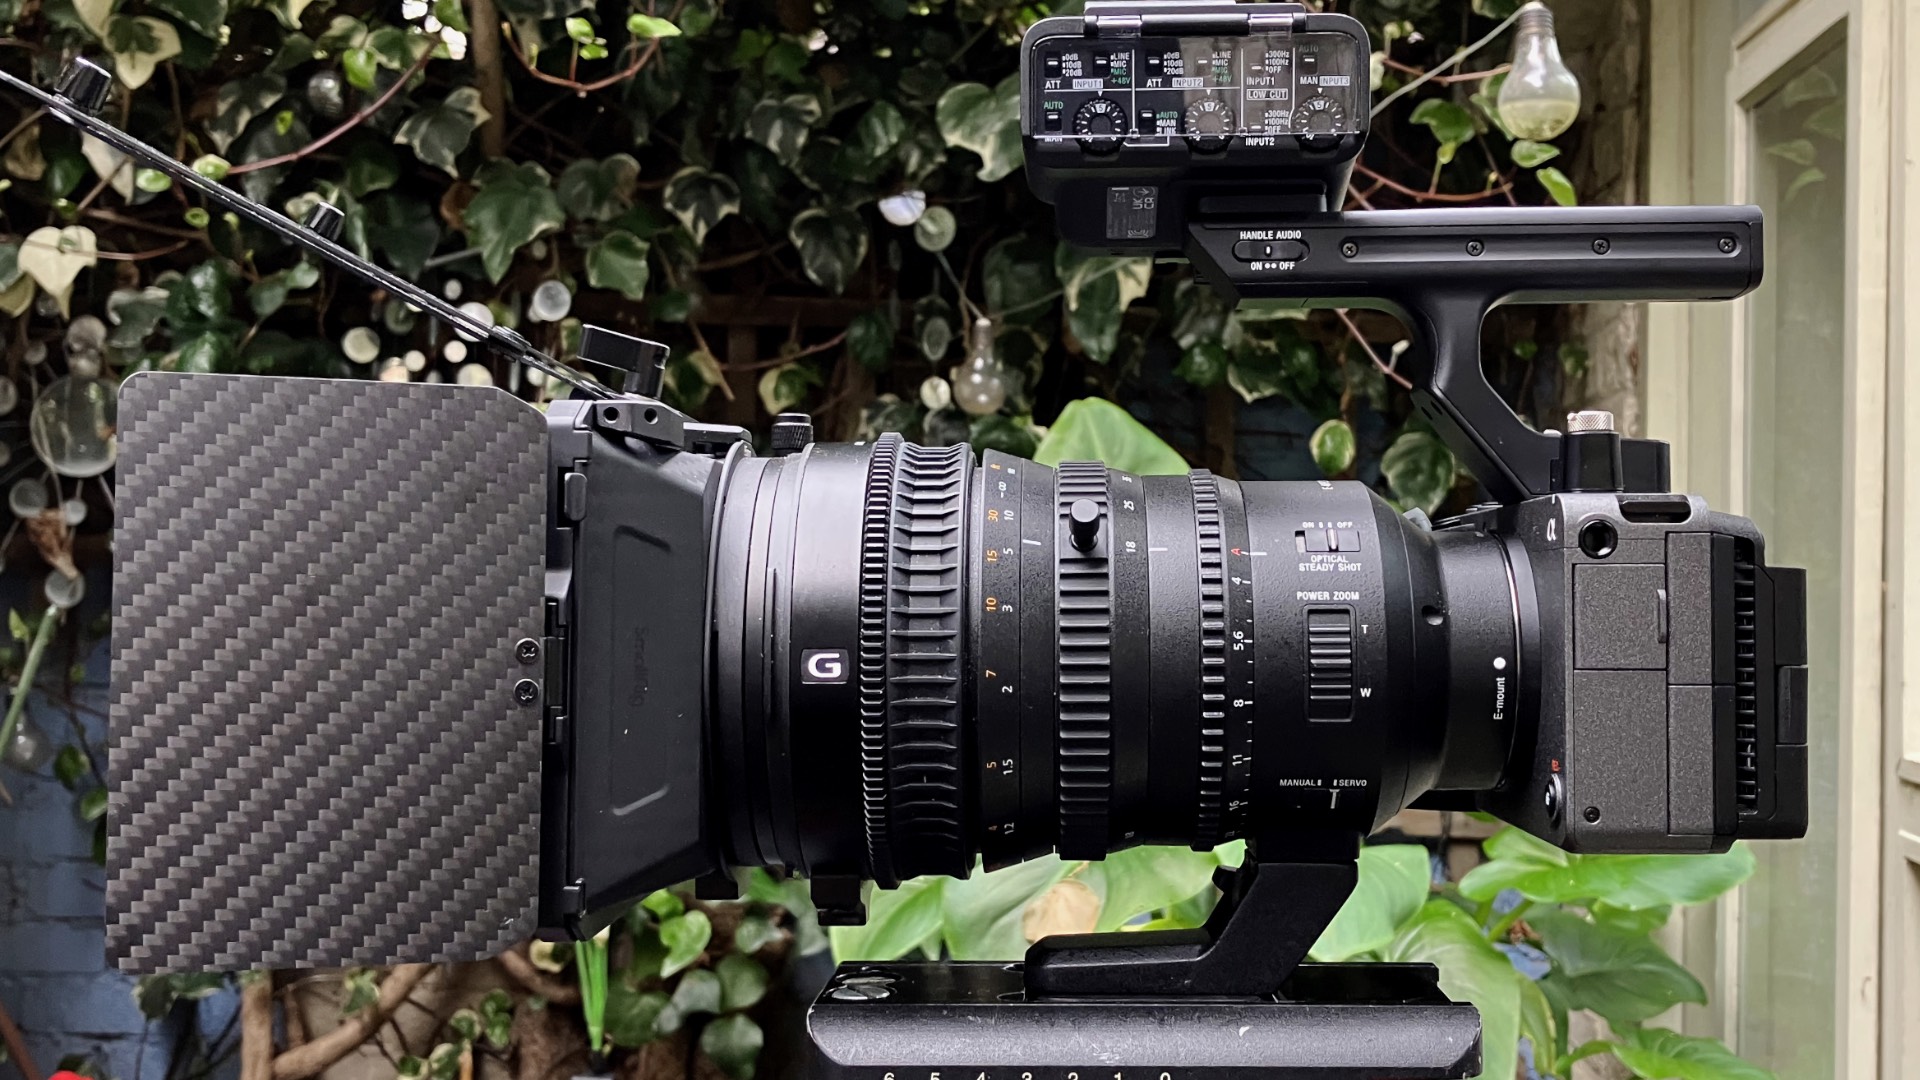 Does my zoom look big in this? The FX30 with Sony 18-110mm zoom and SmallRig matte box.